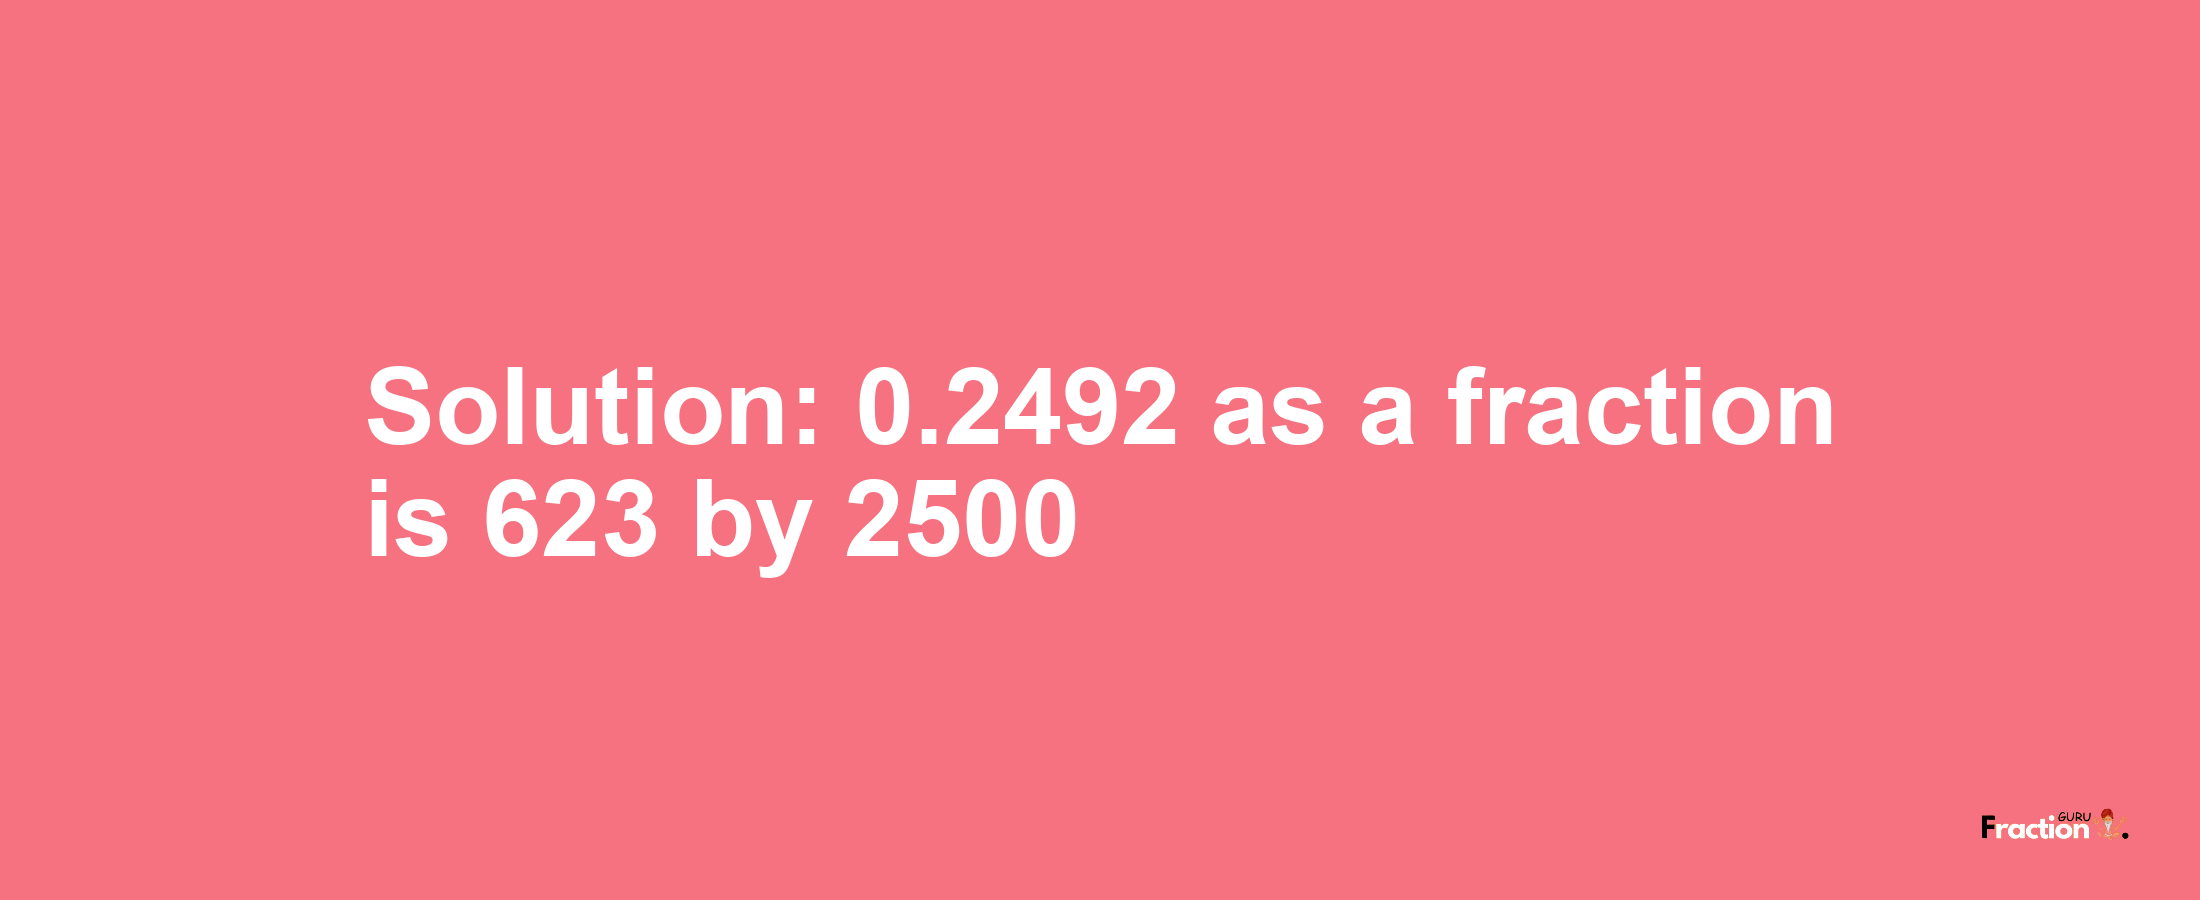 Solution:0.2492 as a fraction is 623/2500